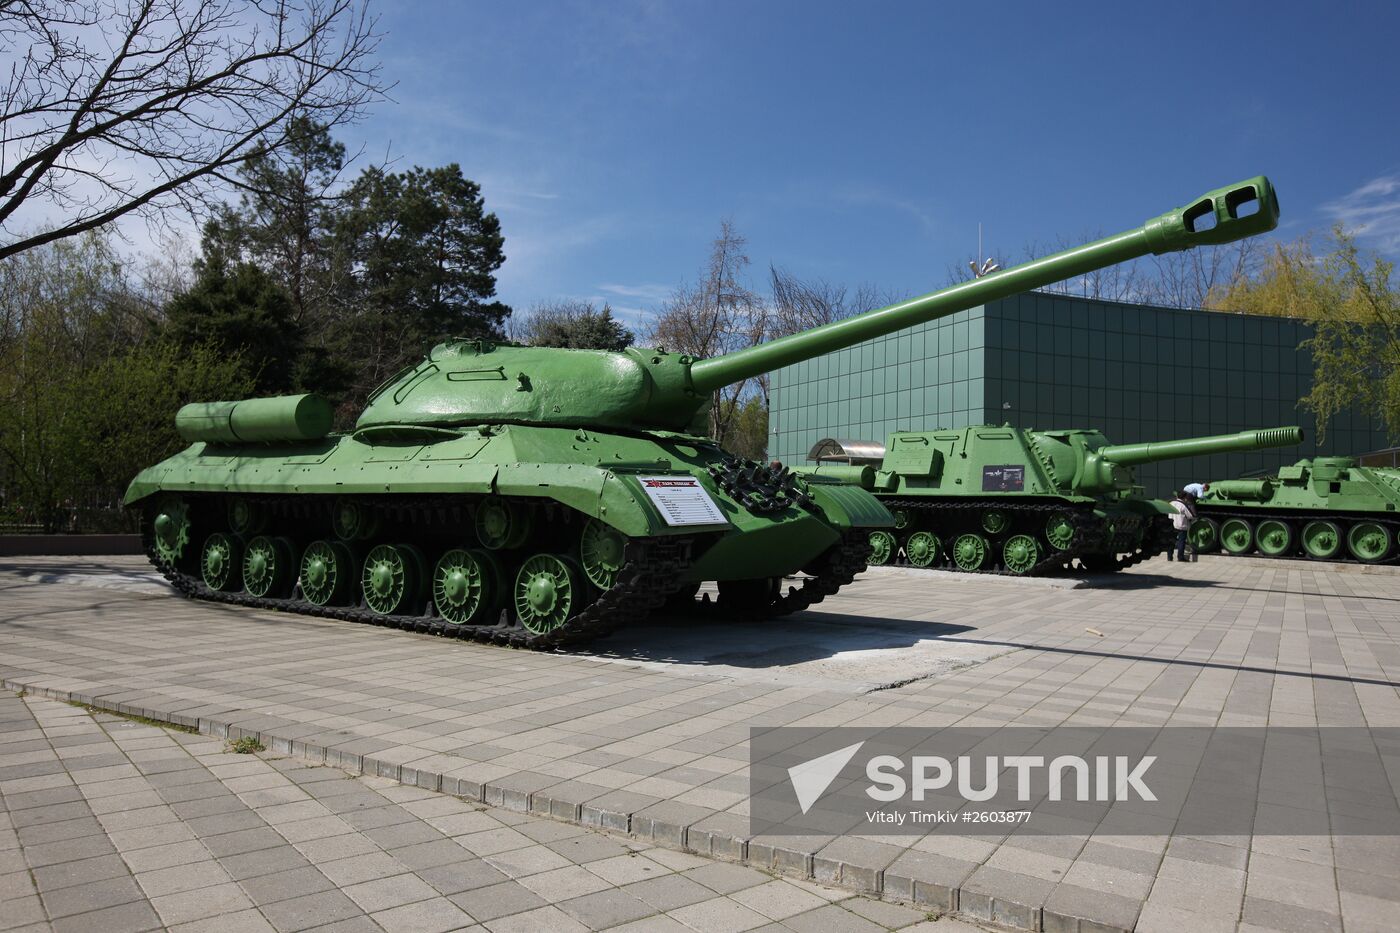 The Victory Weapons museum of military equipment in Krasnodar